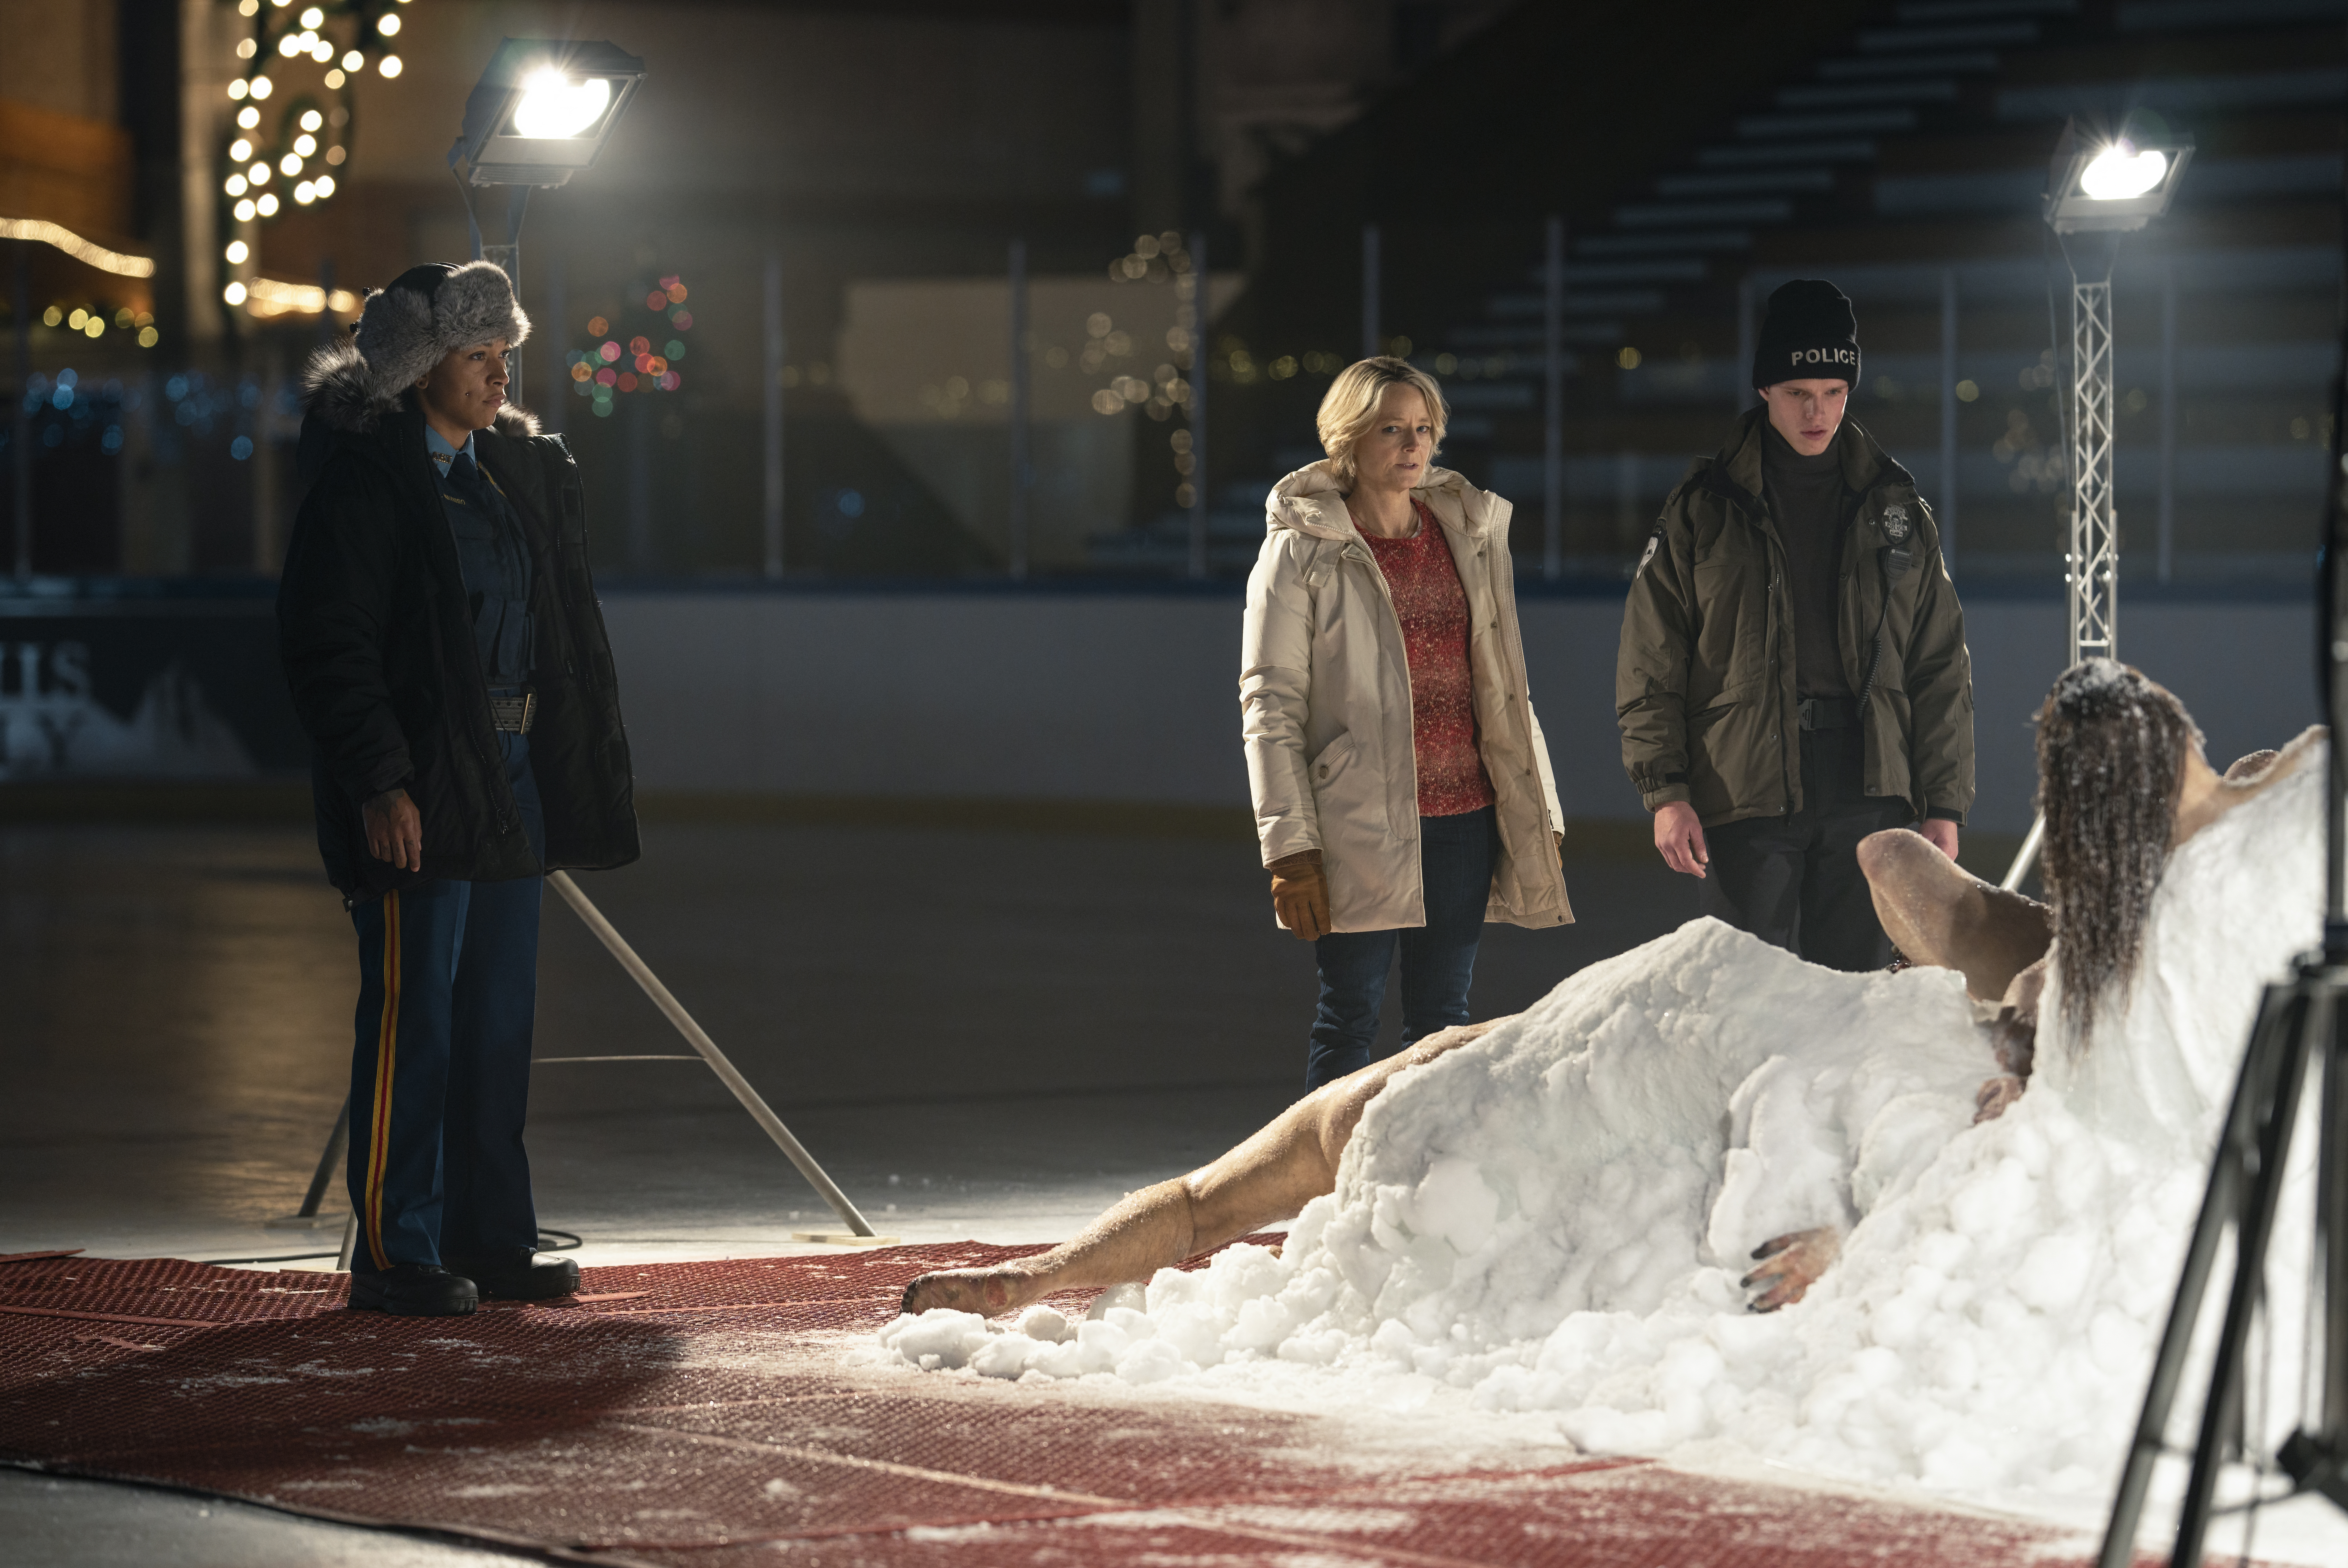 Navarro (Kali Reis), Danvers (Jodie Foster), and Pete (Finn Bennett) standing in front of the corpsicle, a frozen mass of several bodies, in True Detective: Night Country